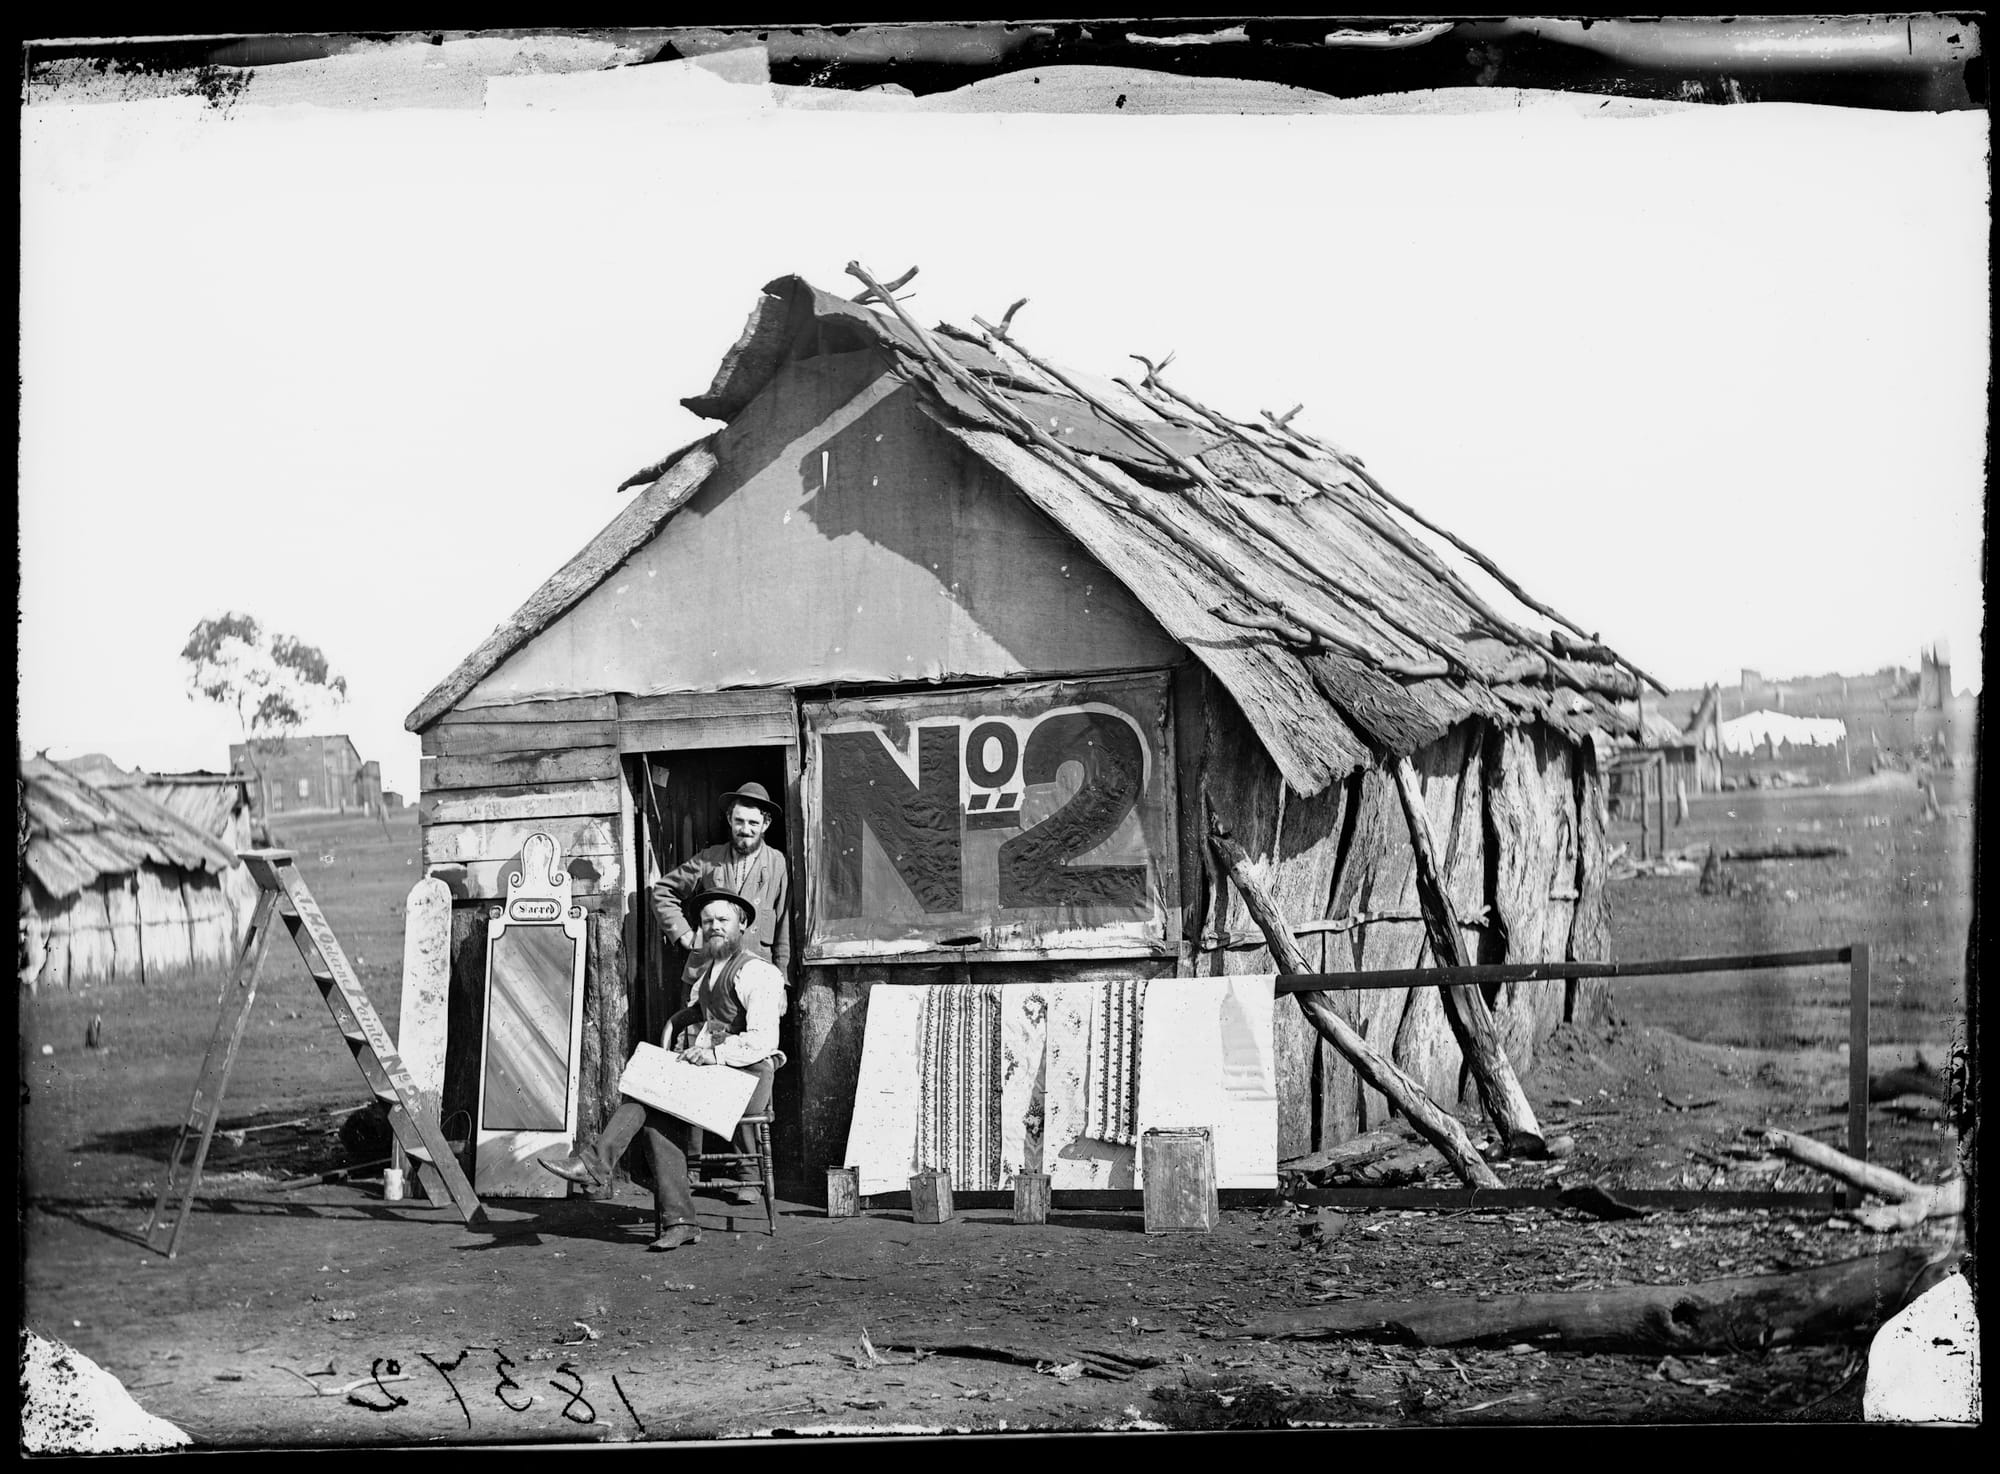 Two men posing outside a ramshakle timber shack with a large No.2 painted on the side, and bits of sign painting work around.